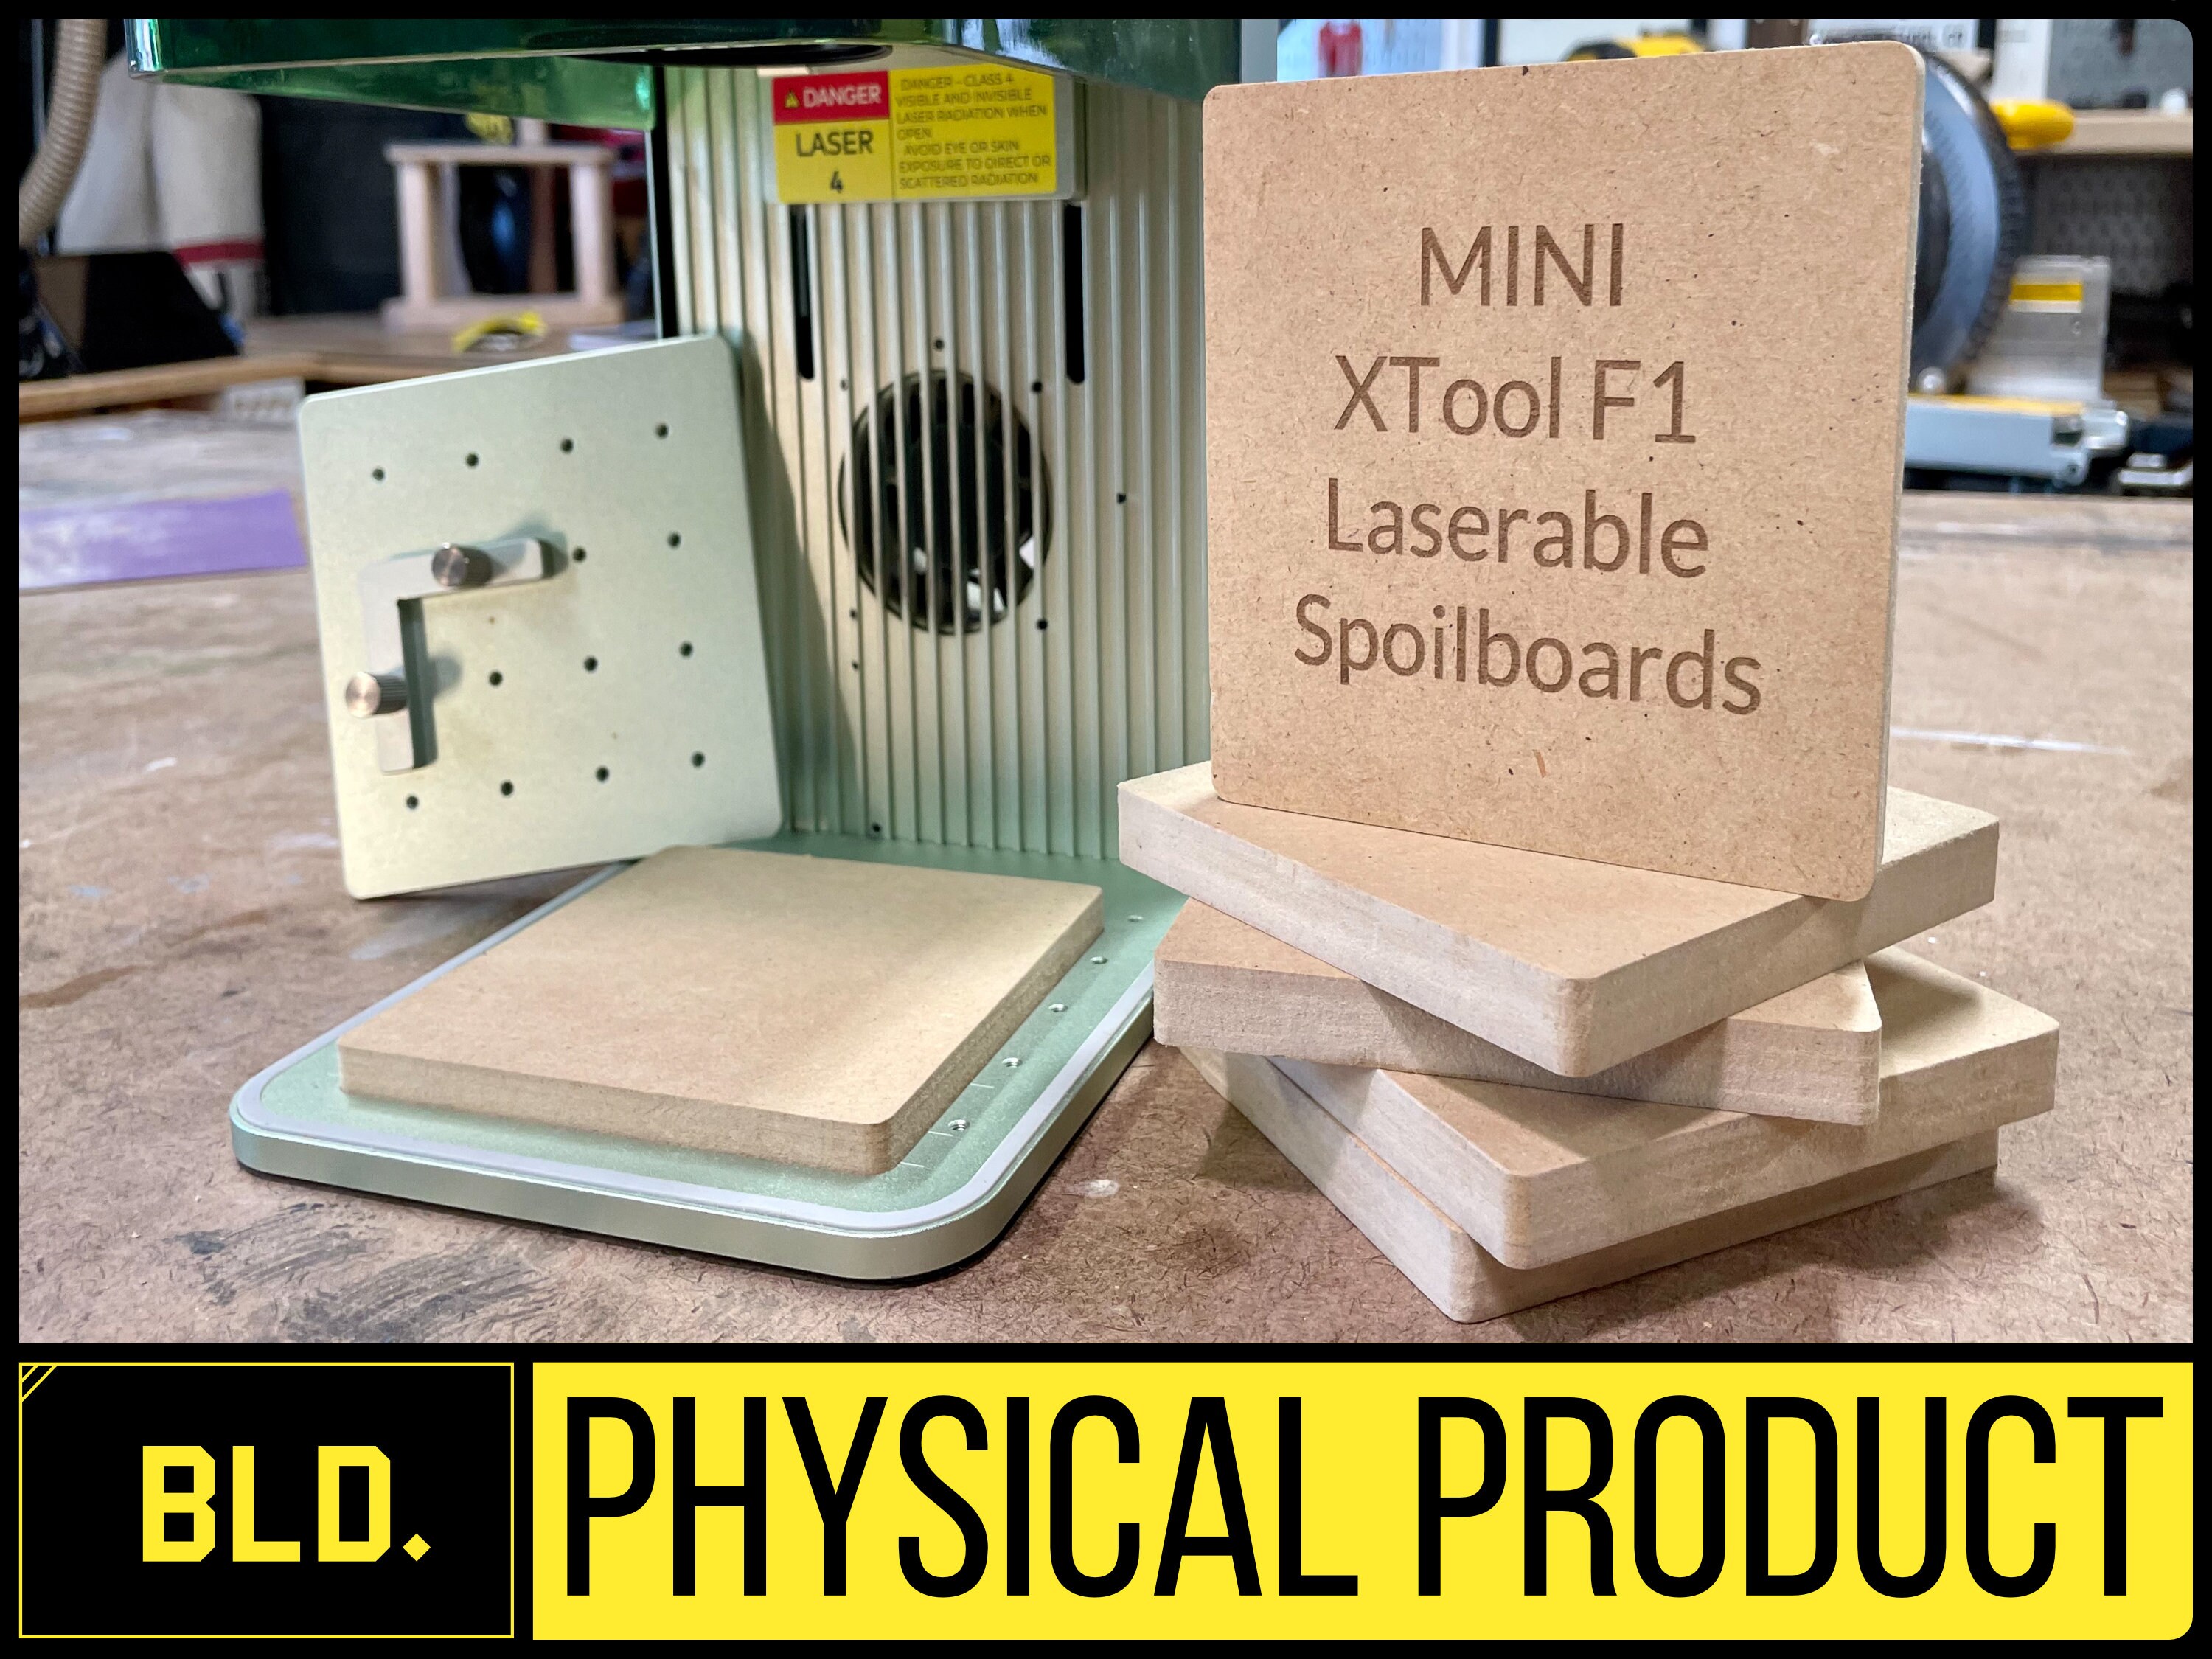 The NEW xTool F1 - Super Fast Laser Cutting & Engraving Machine 